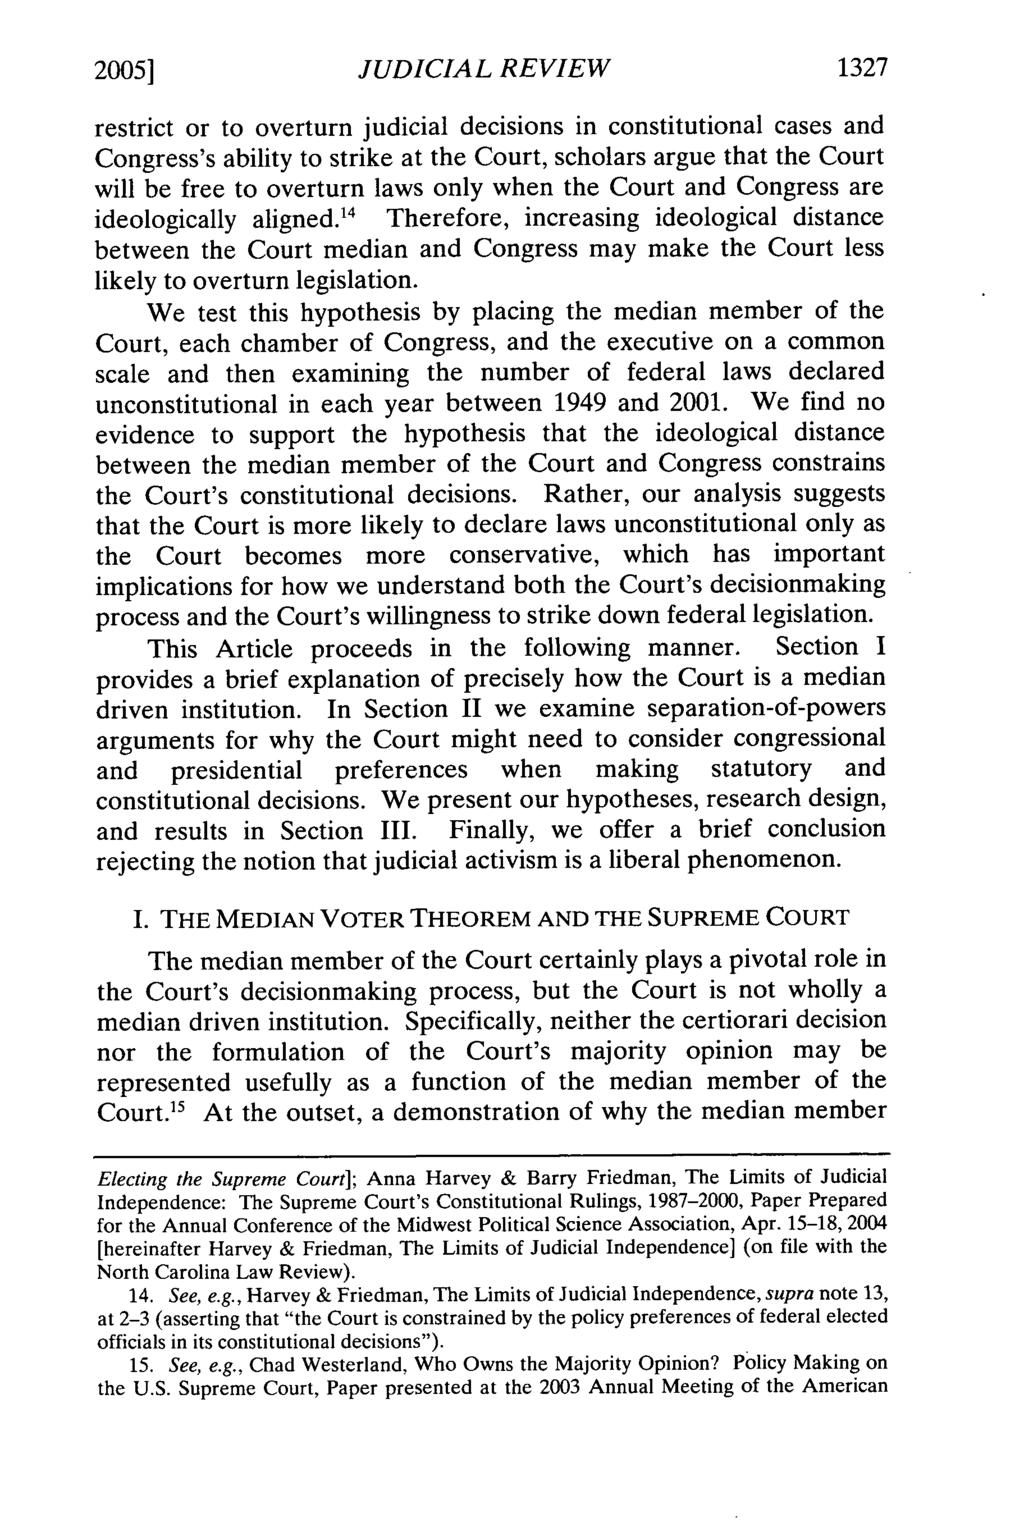 20051 JUDICIAL REVIEW restrict or to overturn judicial decisions in constitutional cases and Congress's ability to strike at the Court, scholars argue that the Court will be free to overturn laws